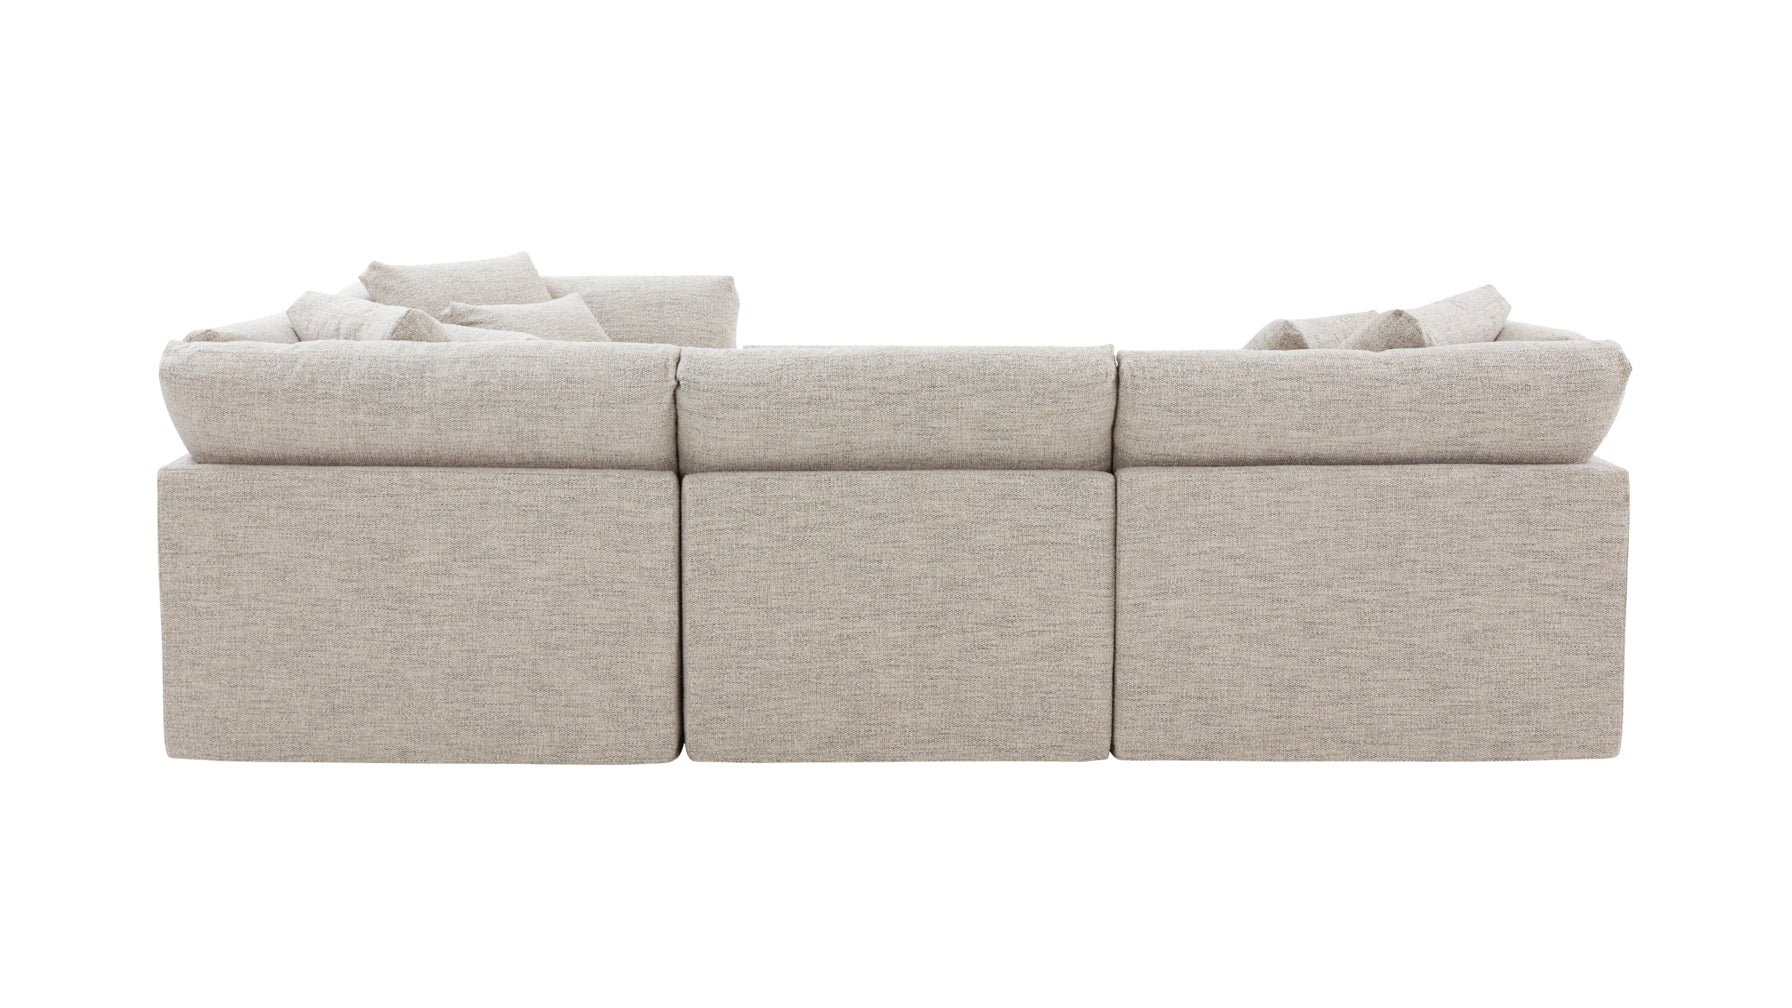 Get Together™ 4-Piece Modular Sectional Closed, Standard, Oatmeal - Image 7